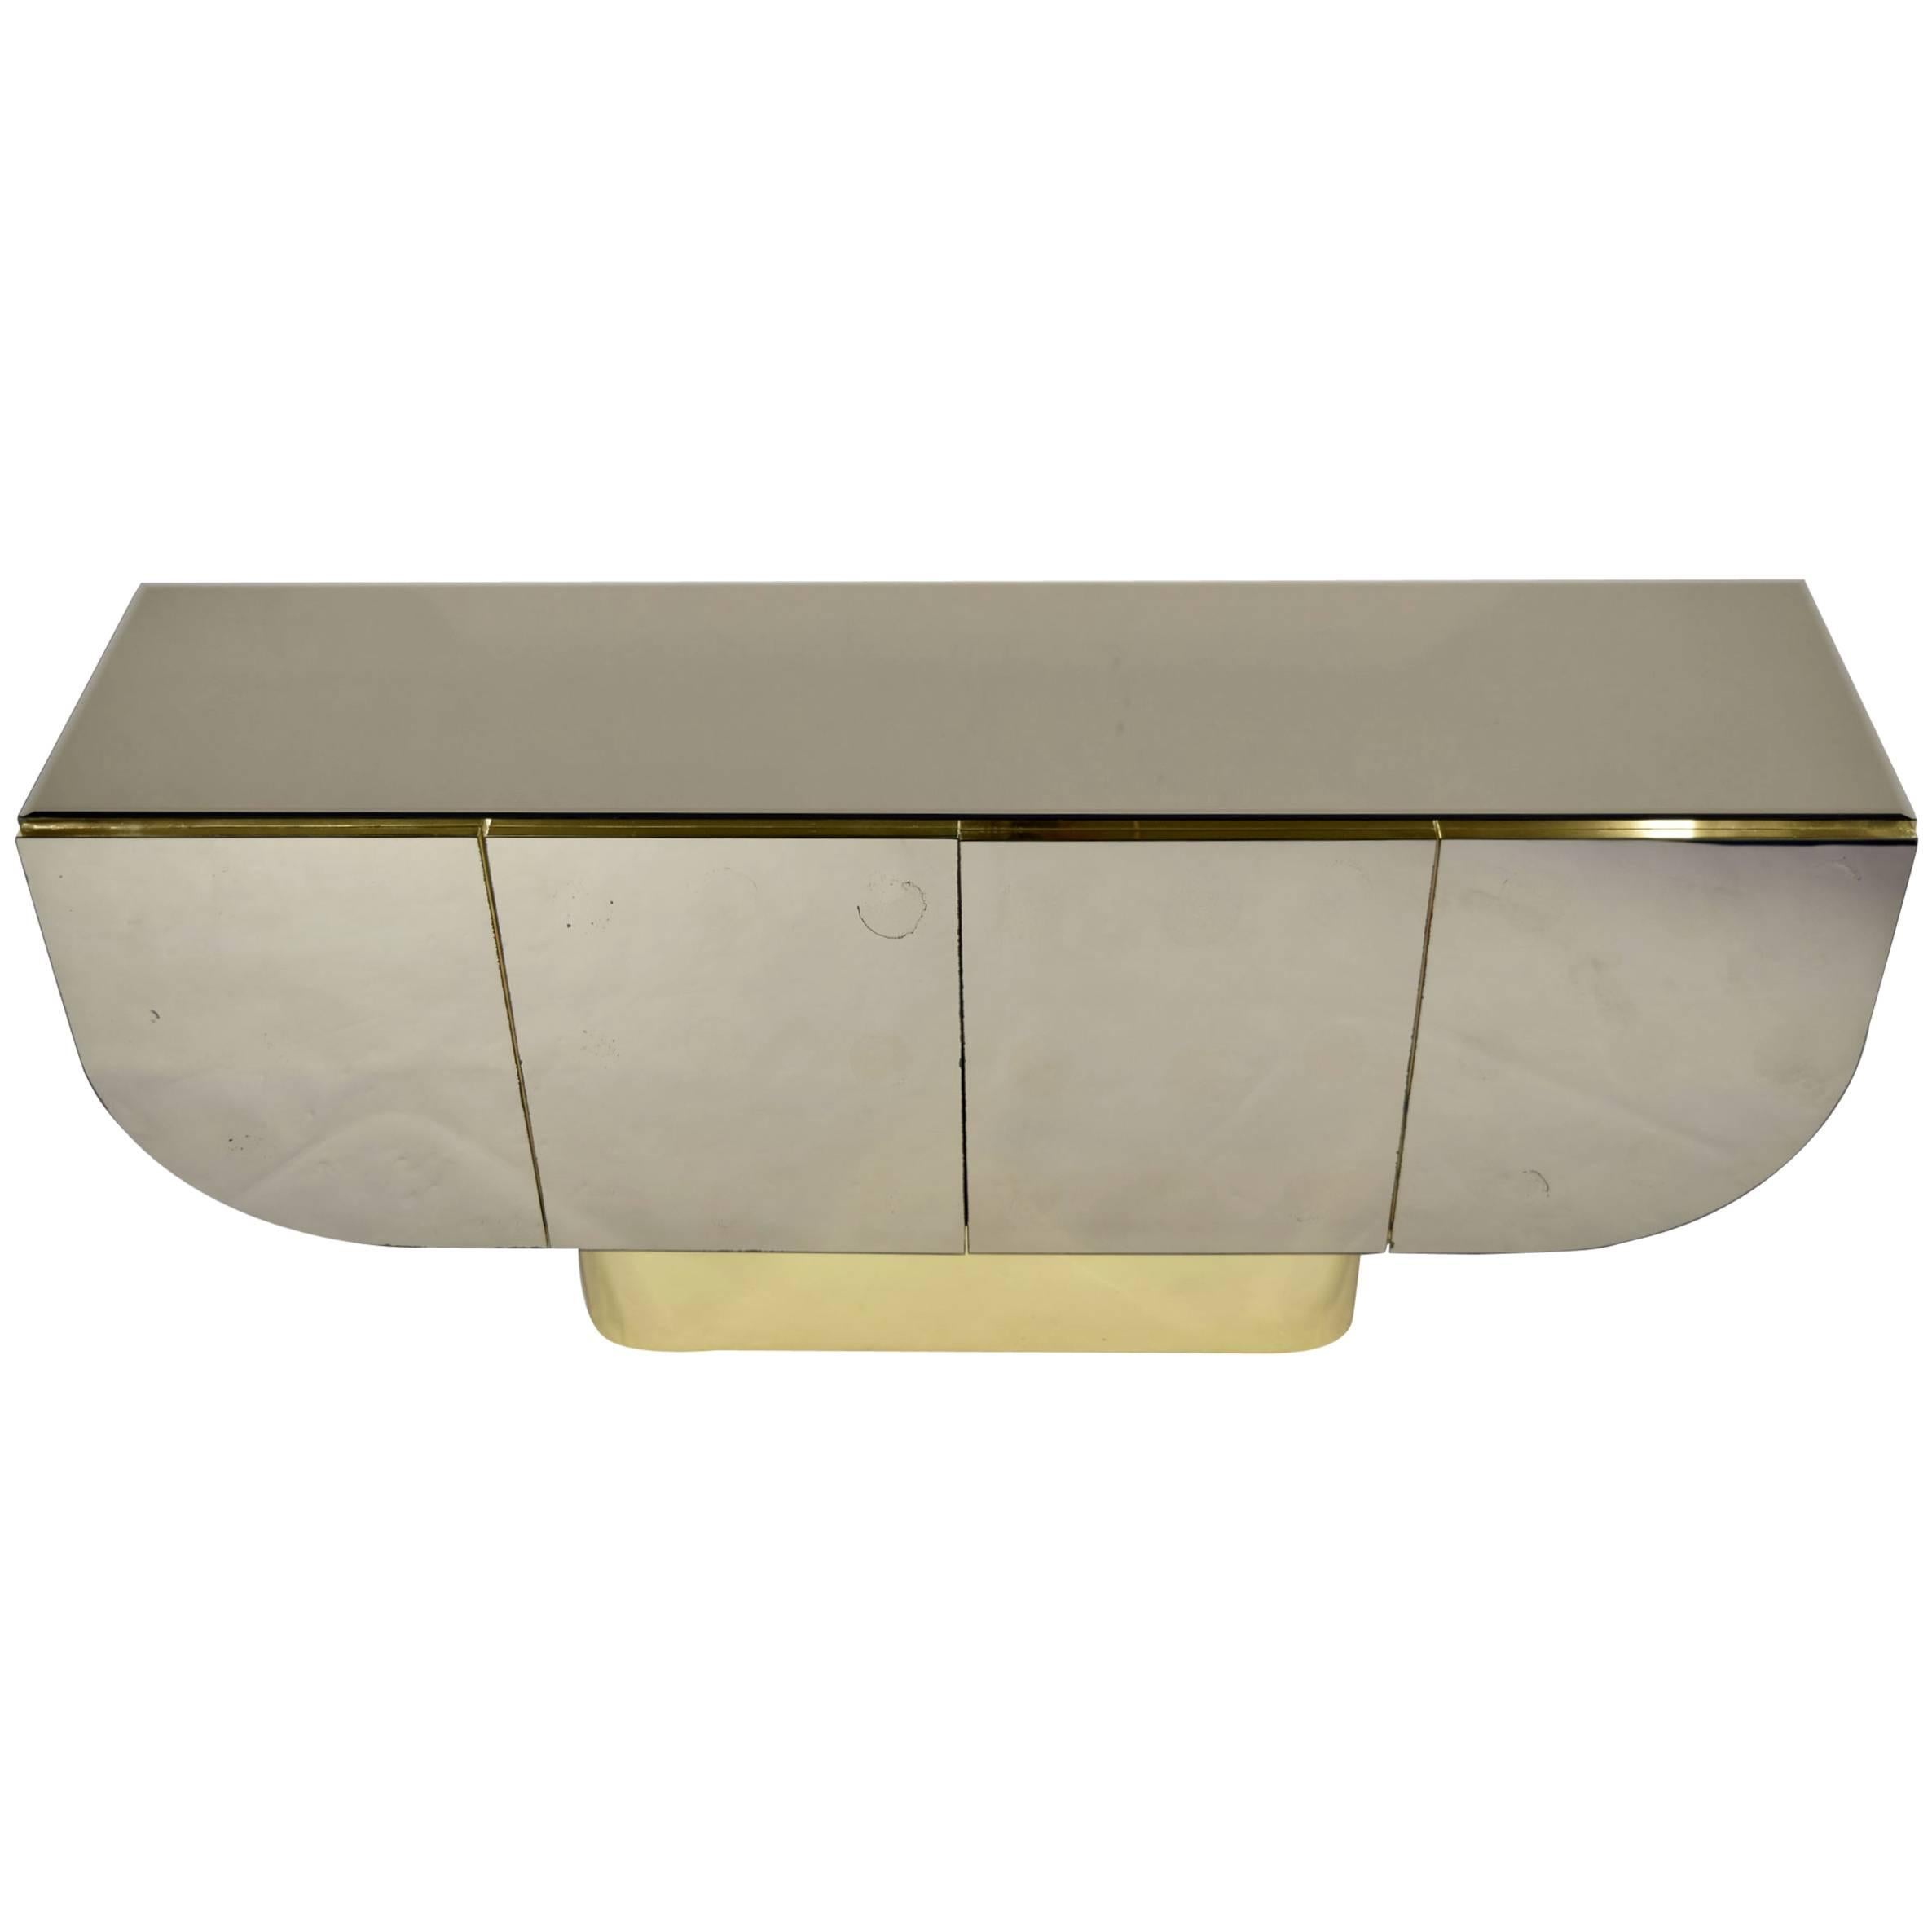 Bronze Mirrored Sideboard with Brass Finish Trim, maybe Ello